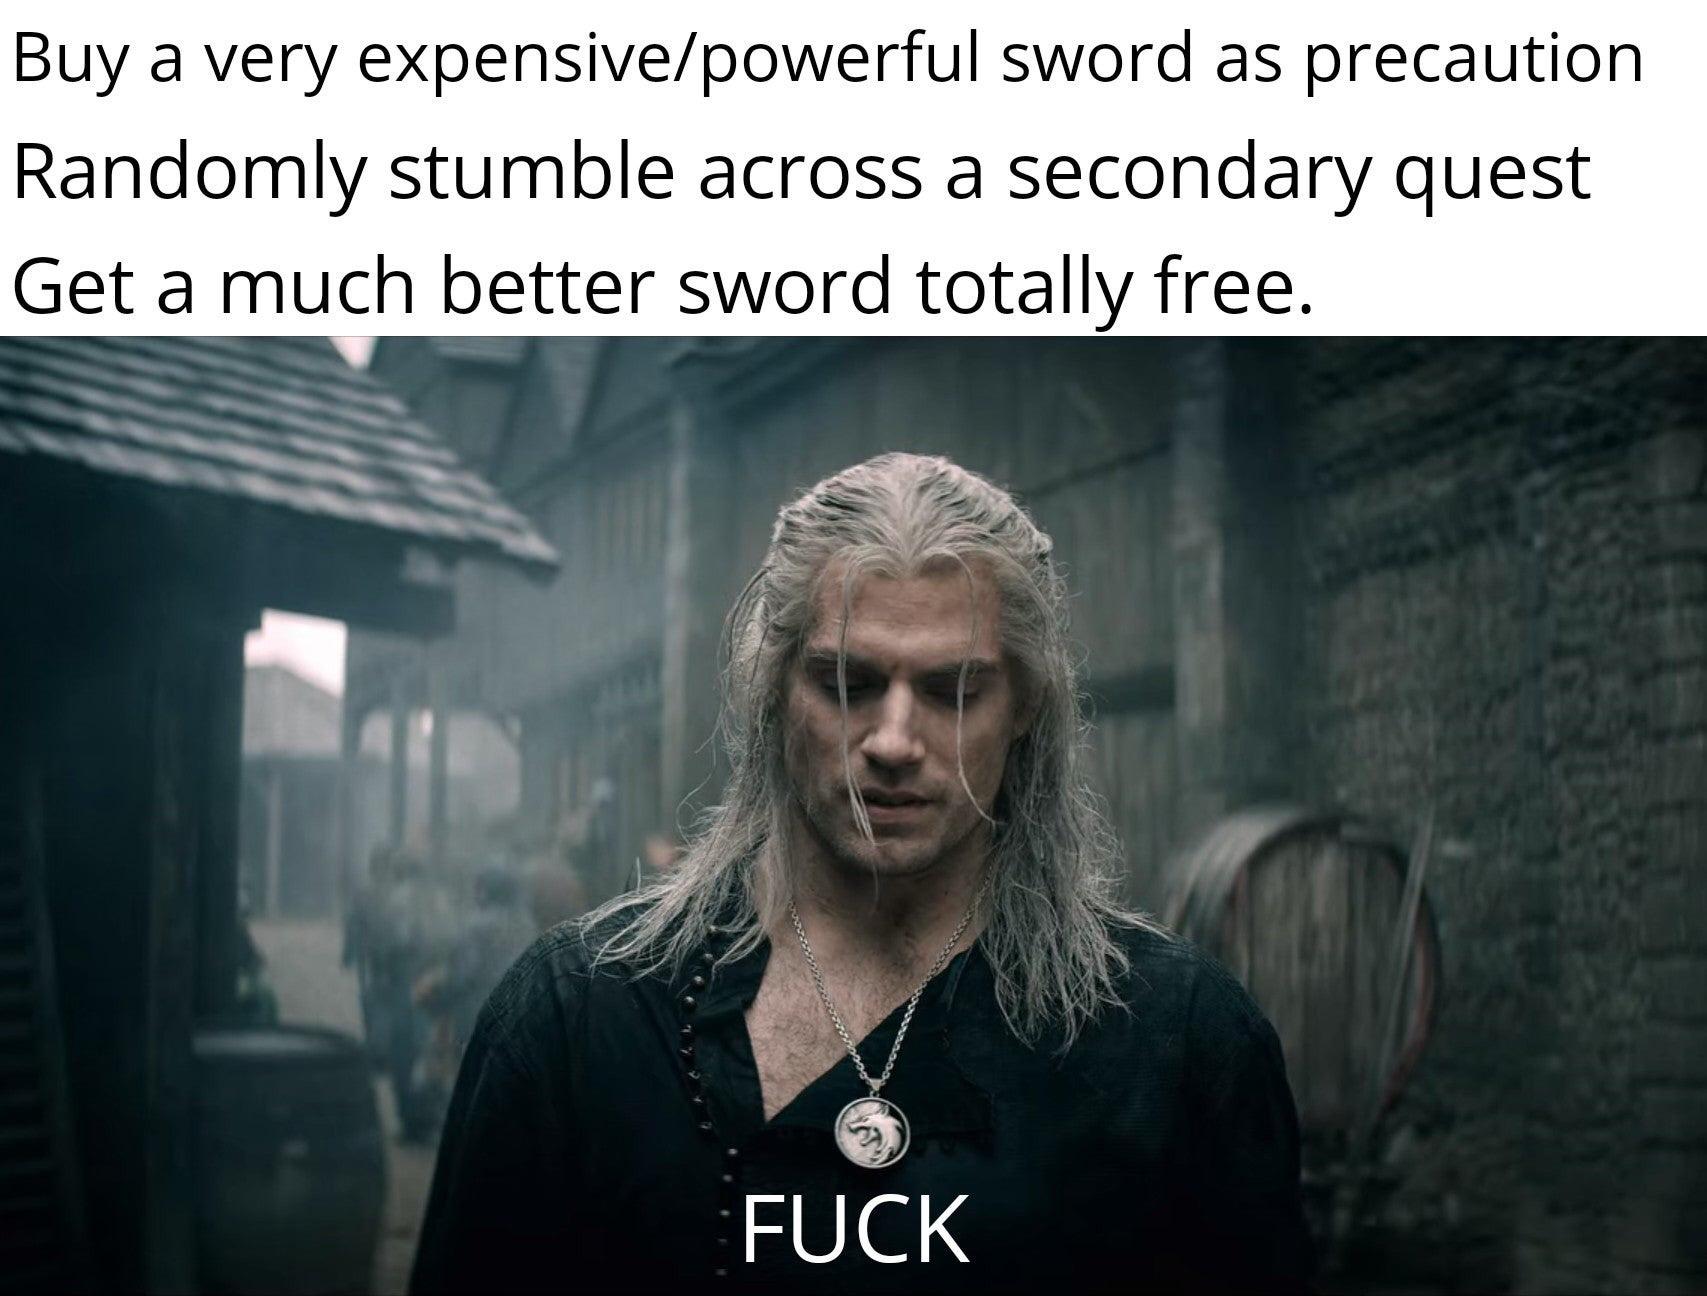 6ft meme - Buy a very expensivepowerful sword as precaution Randomly stumble across a secondary quest Get a much better sword totally free. Fuck